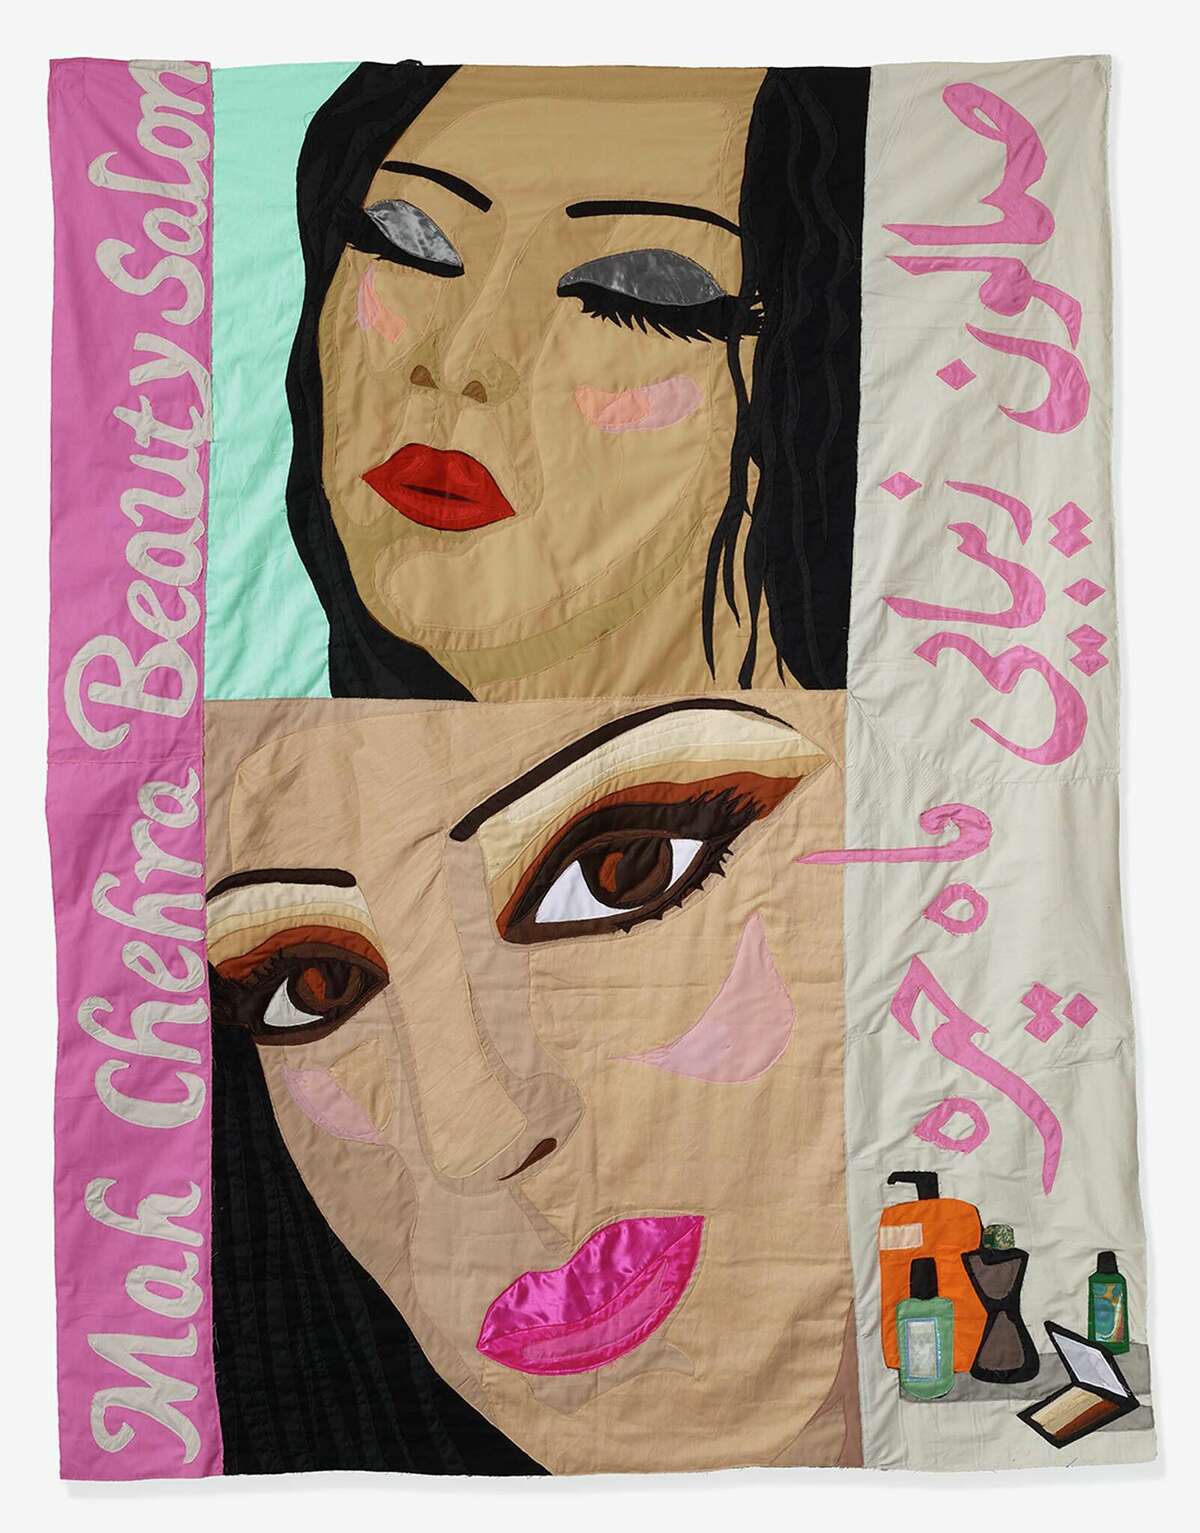 Hangama Amiri: A Homage to Home — Mah Chehra Beauty Parlor, 2022, muslin, cotton, chiffon, polyester, suede, iridescent paper, iridescent fabric, silk and found fabric